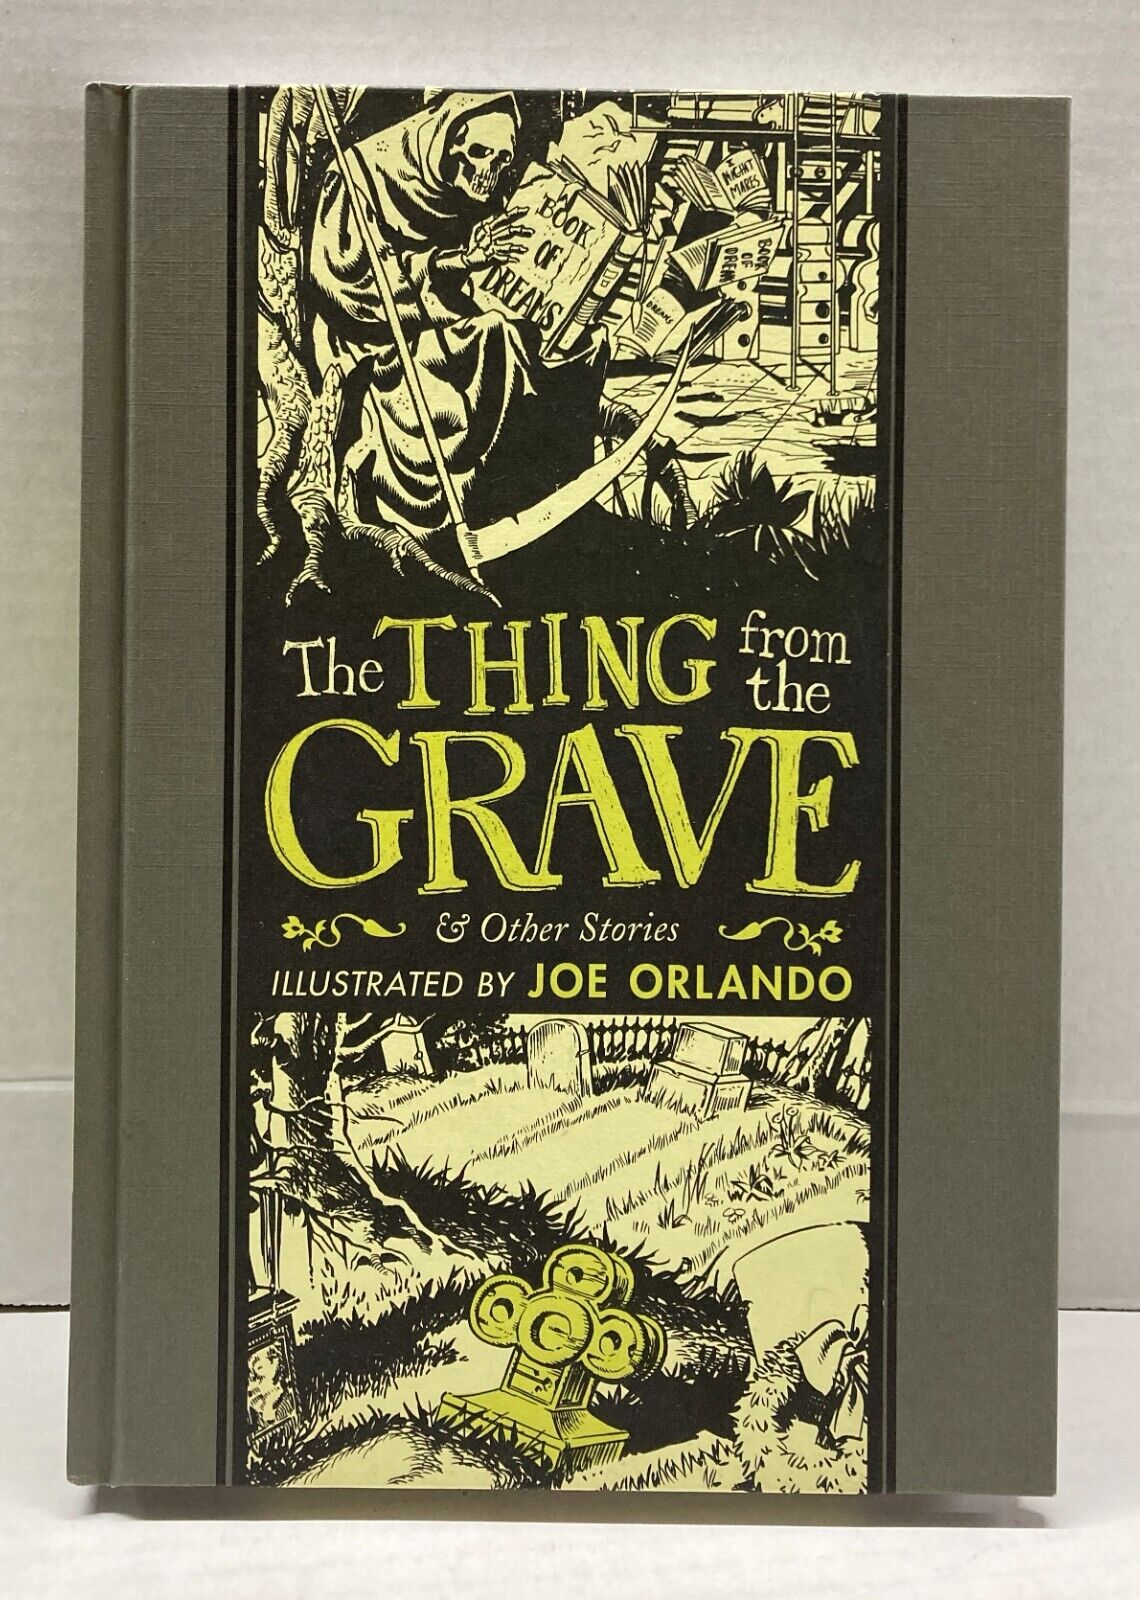 The Thing from the Grave and Other Stories illustrated by Joe Orlando